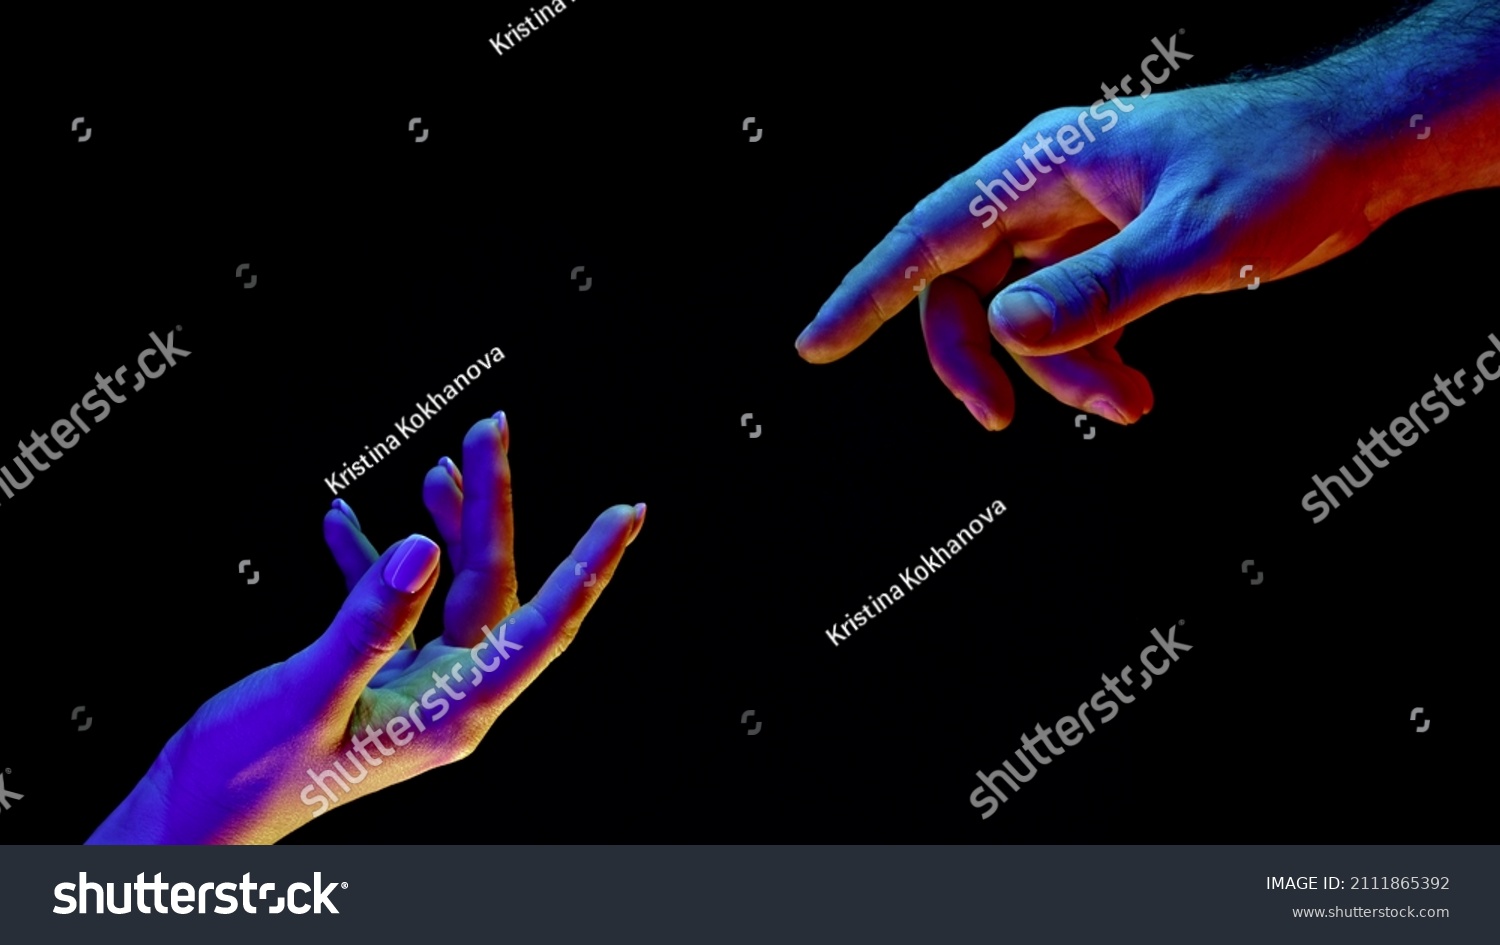 Idea of earth creation. Hands reaching out, pointing finger together on black and neon colorful light. Man and woman, love, religion. Contemporary art, evolution, origins concept. #2111865392